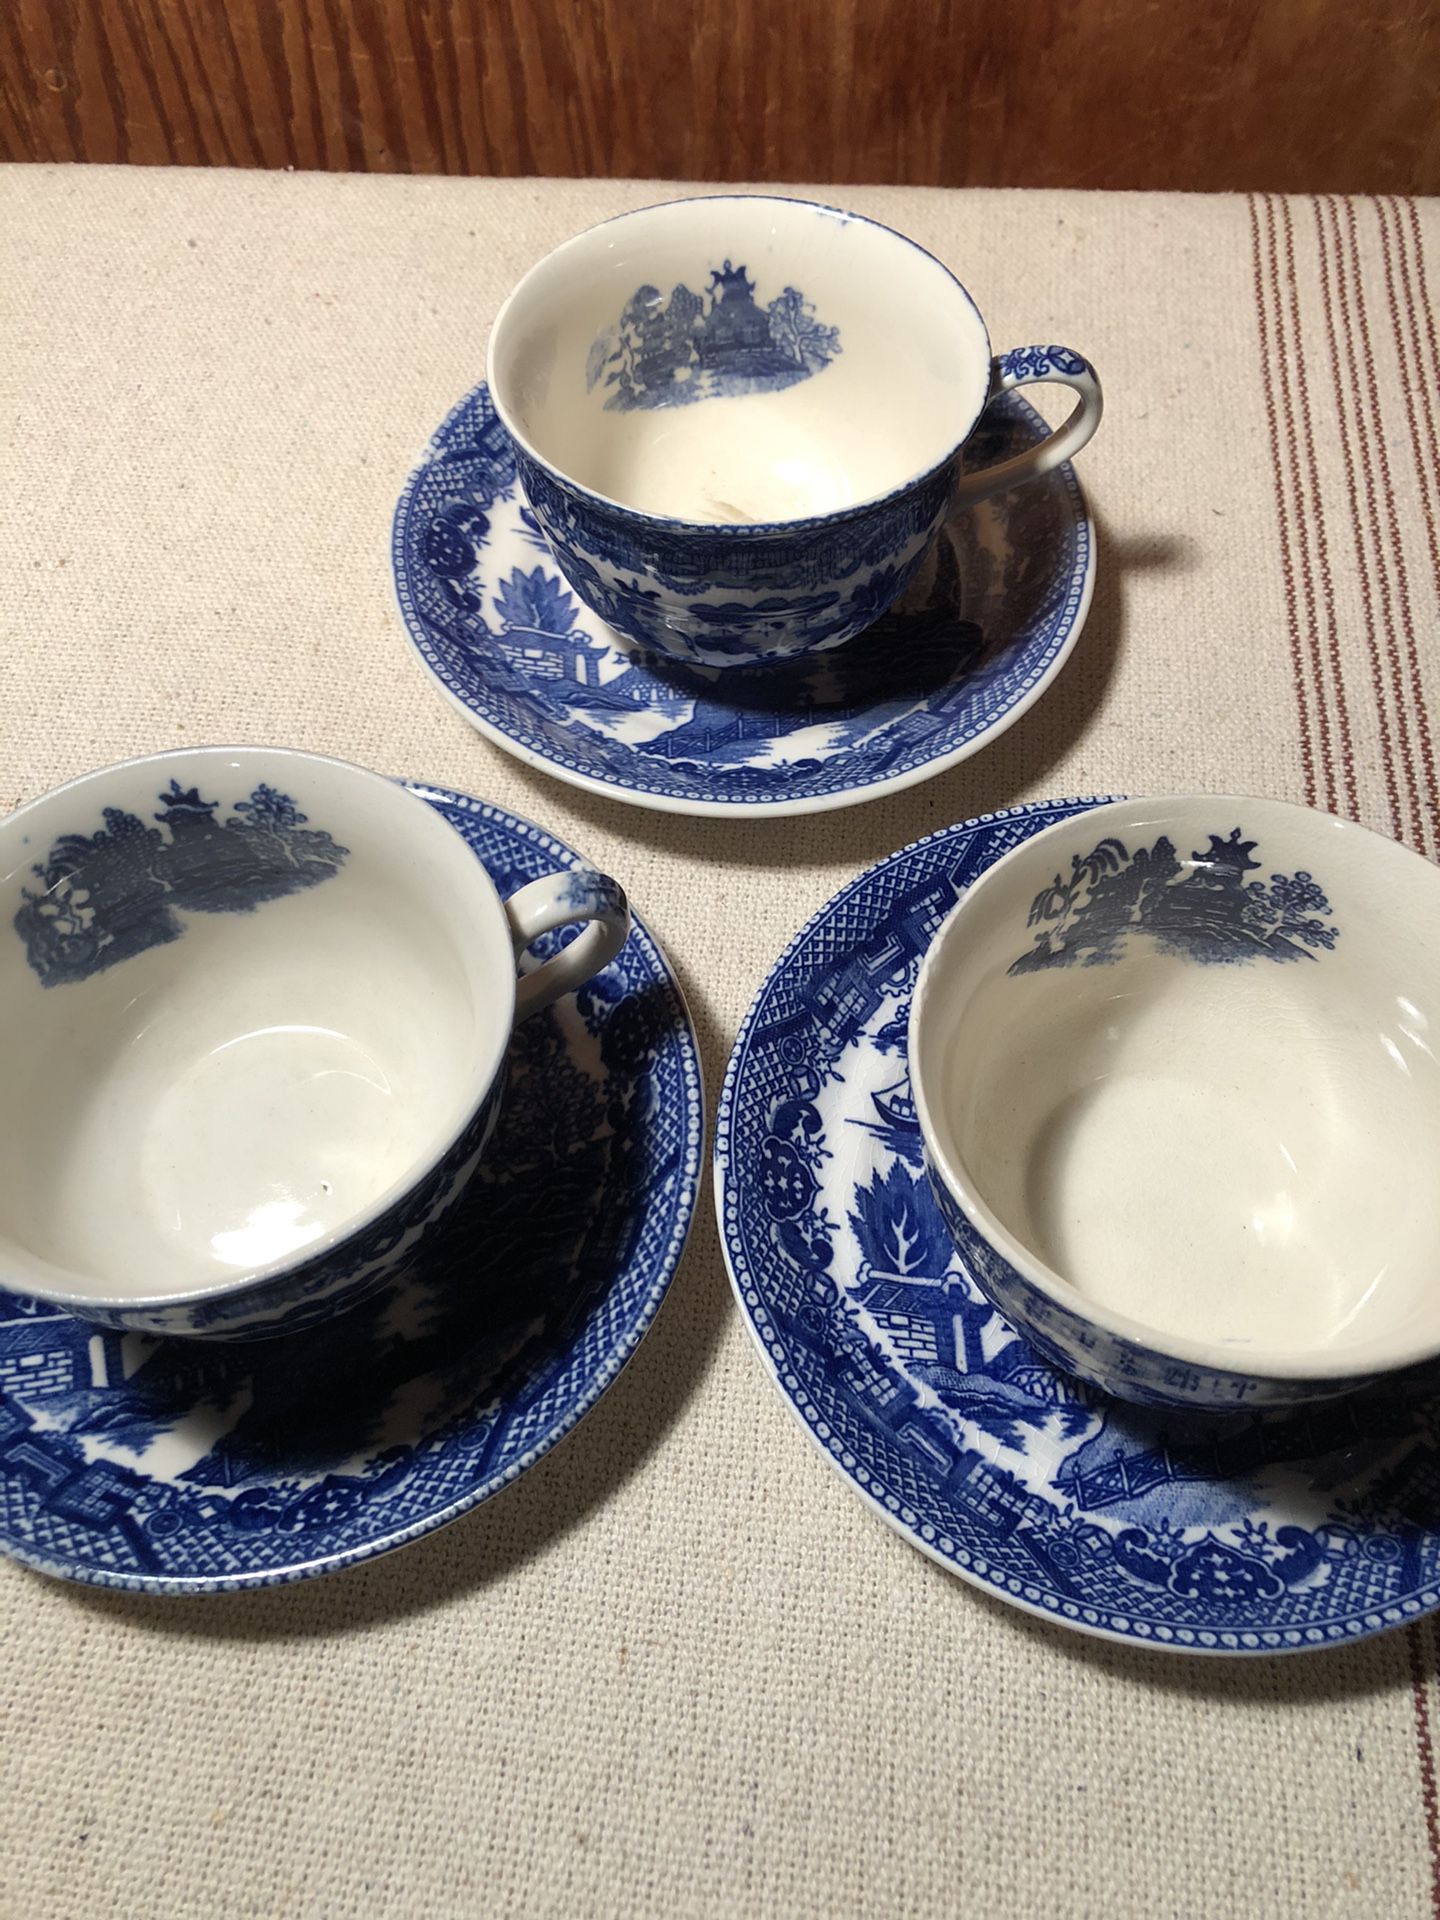 3 Blue Willow Tea Cup And Saucer Sets